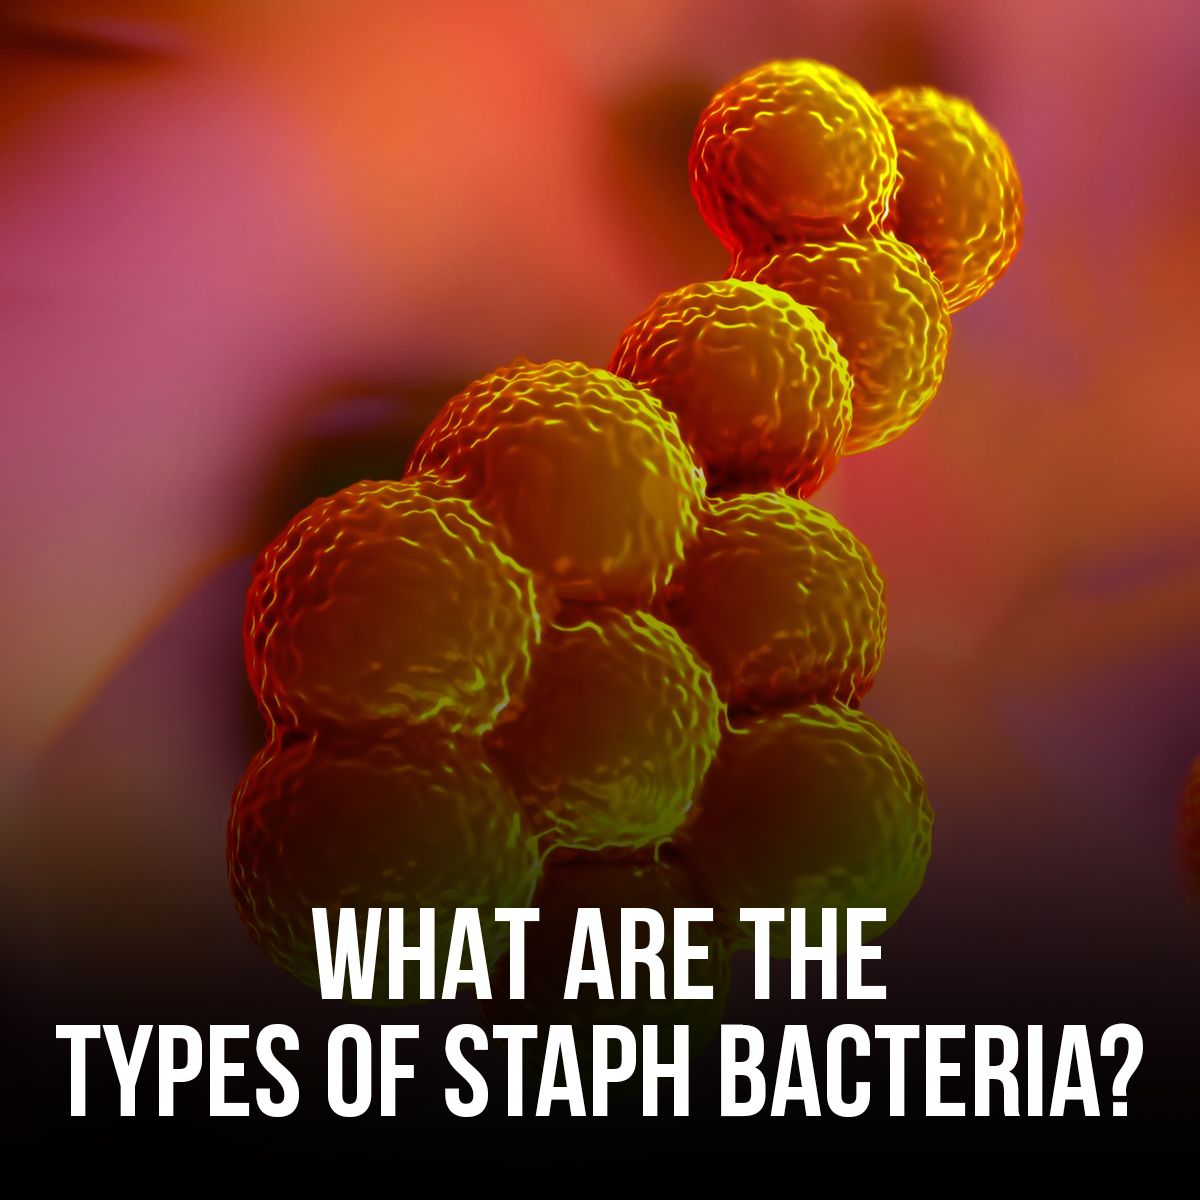 What Are the Types of Staph Bacteria?